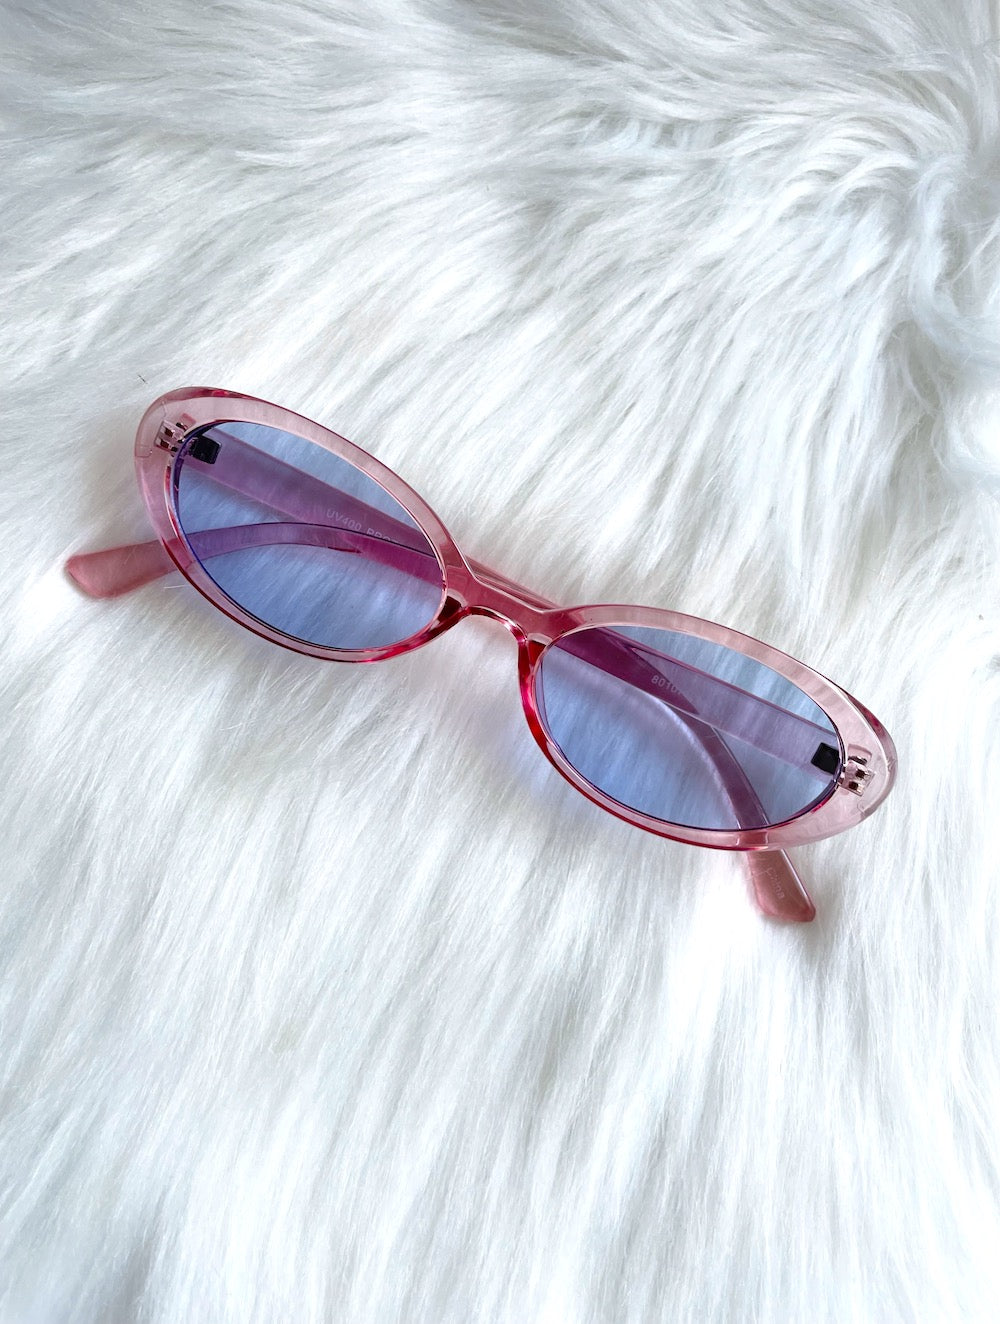 Skinny Oval Pink and Blue Translucent Sunglasses